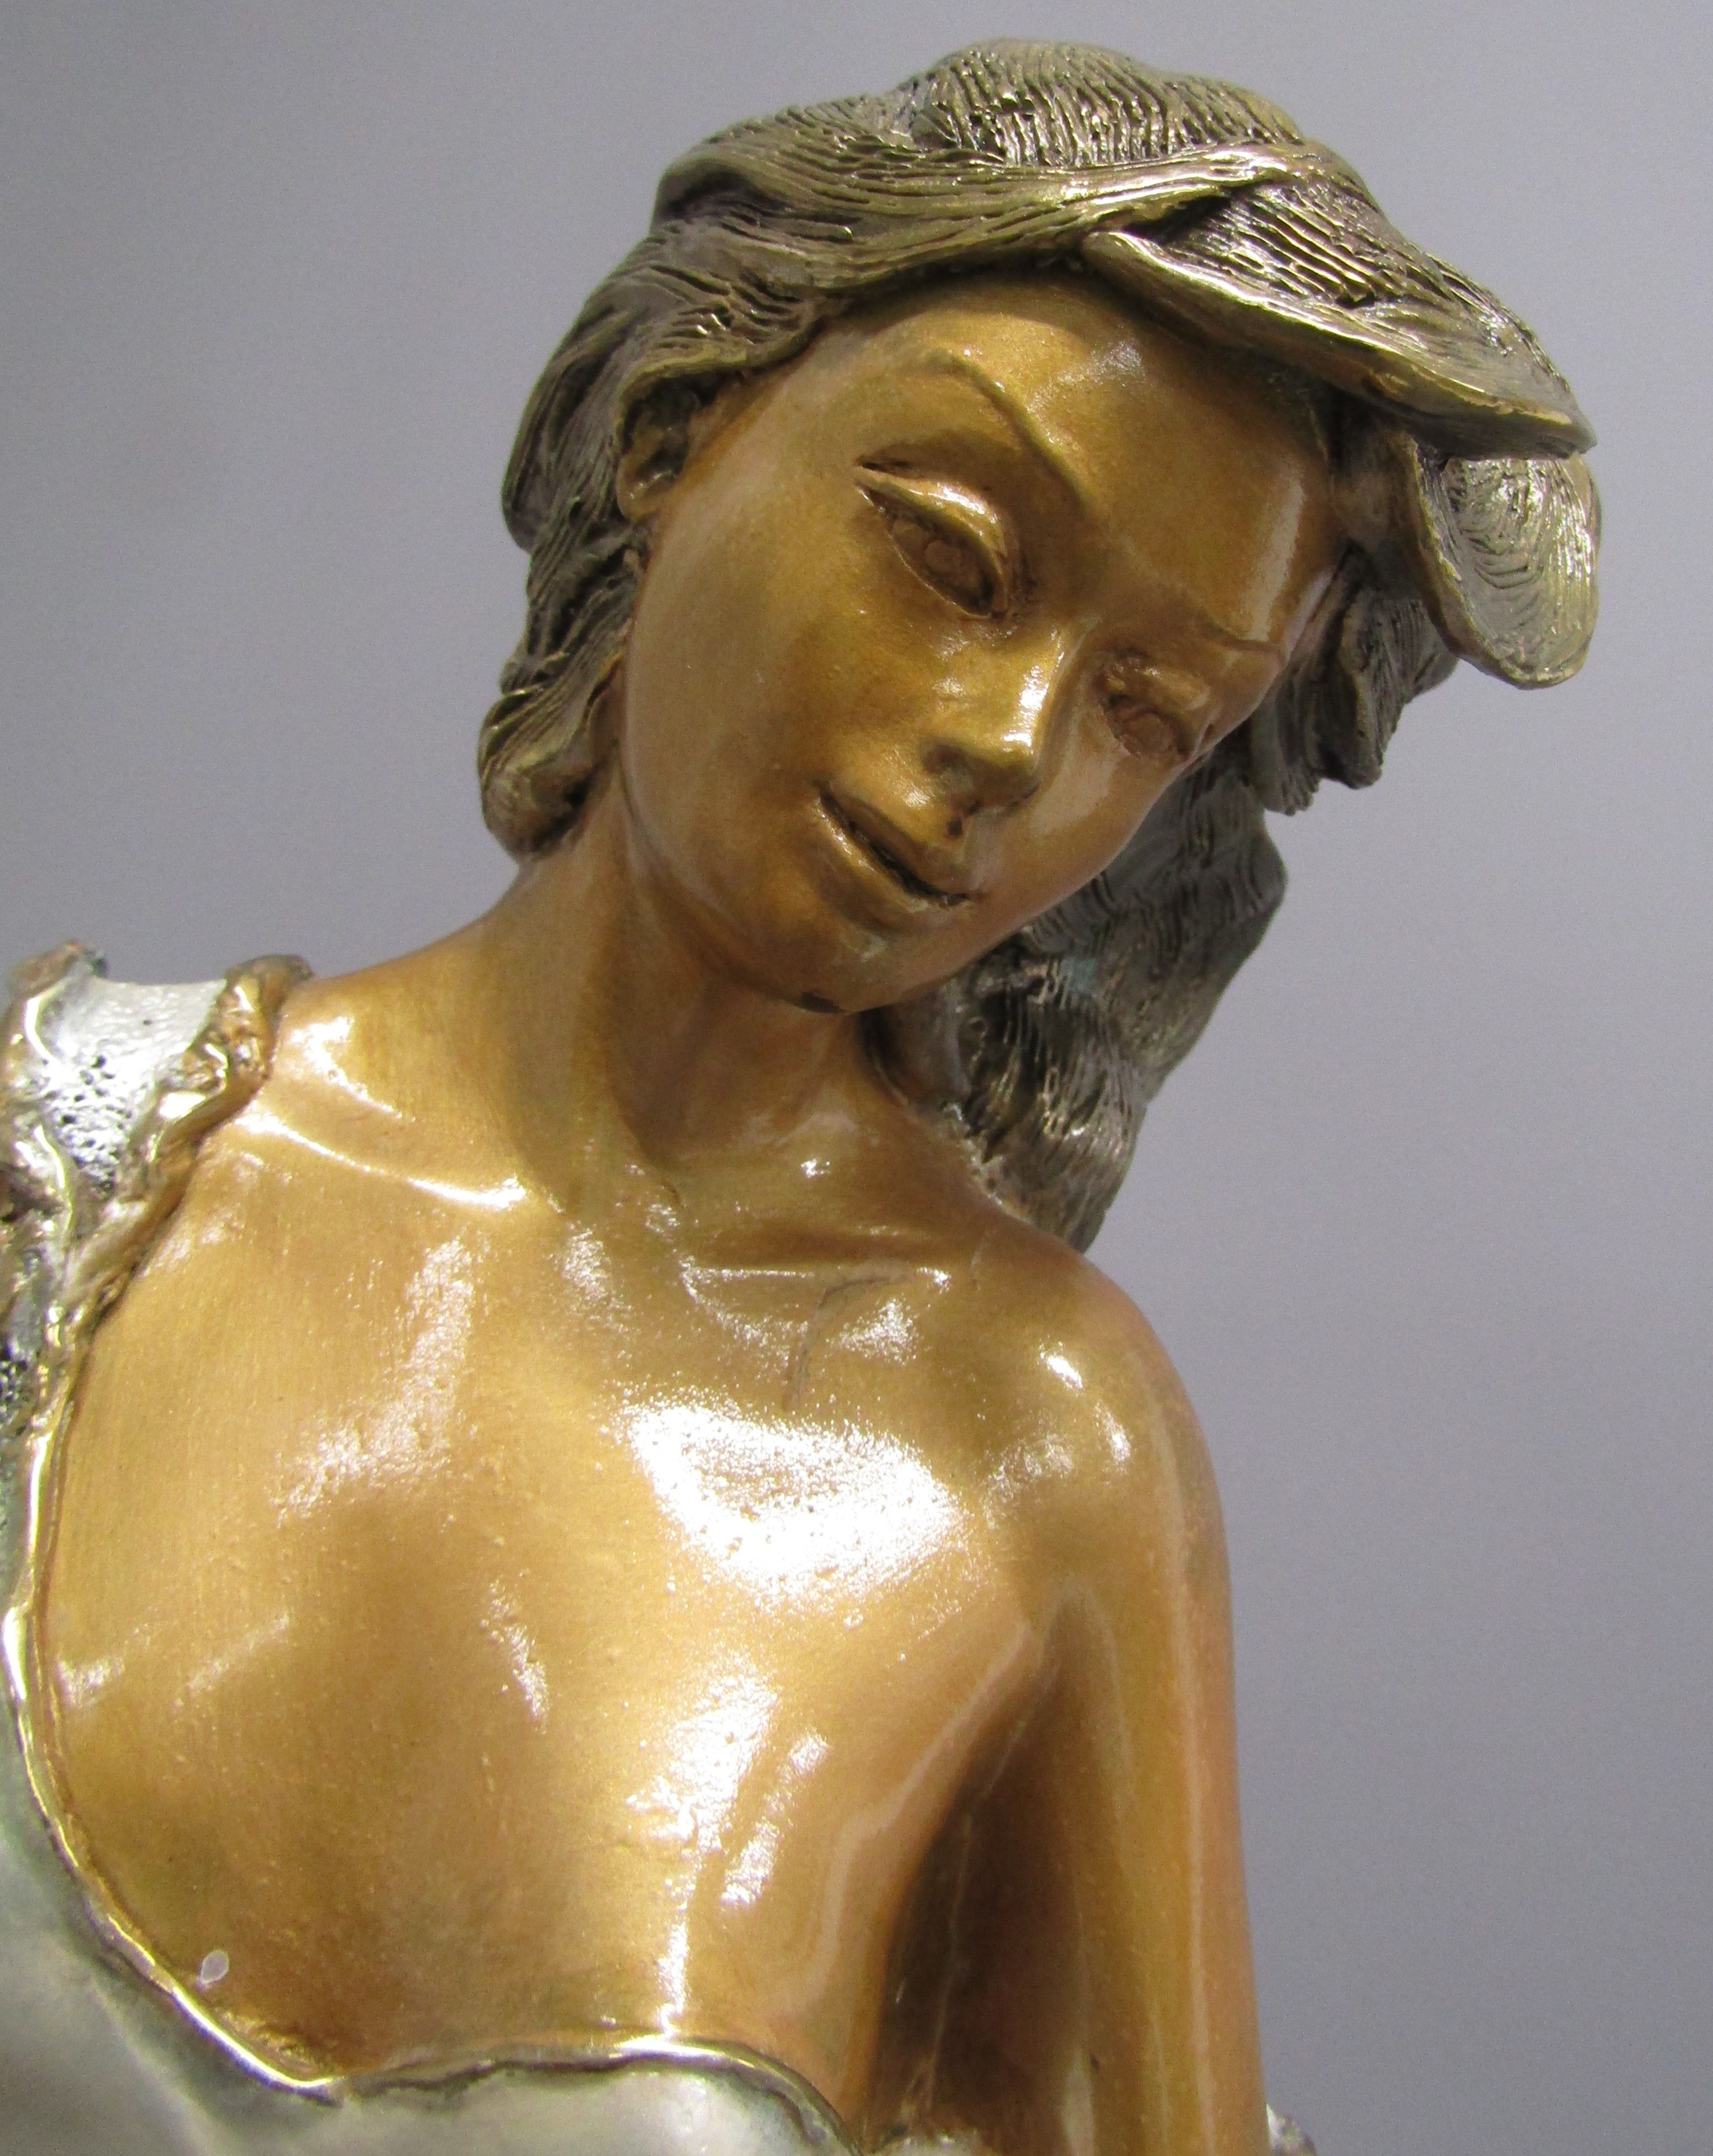 A. Basso bronze figure of lady with a dolphin on a wave, Ombri Fine Arts 1996 - approx. 65cm tall ( - Image 2 of 8